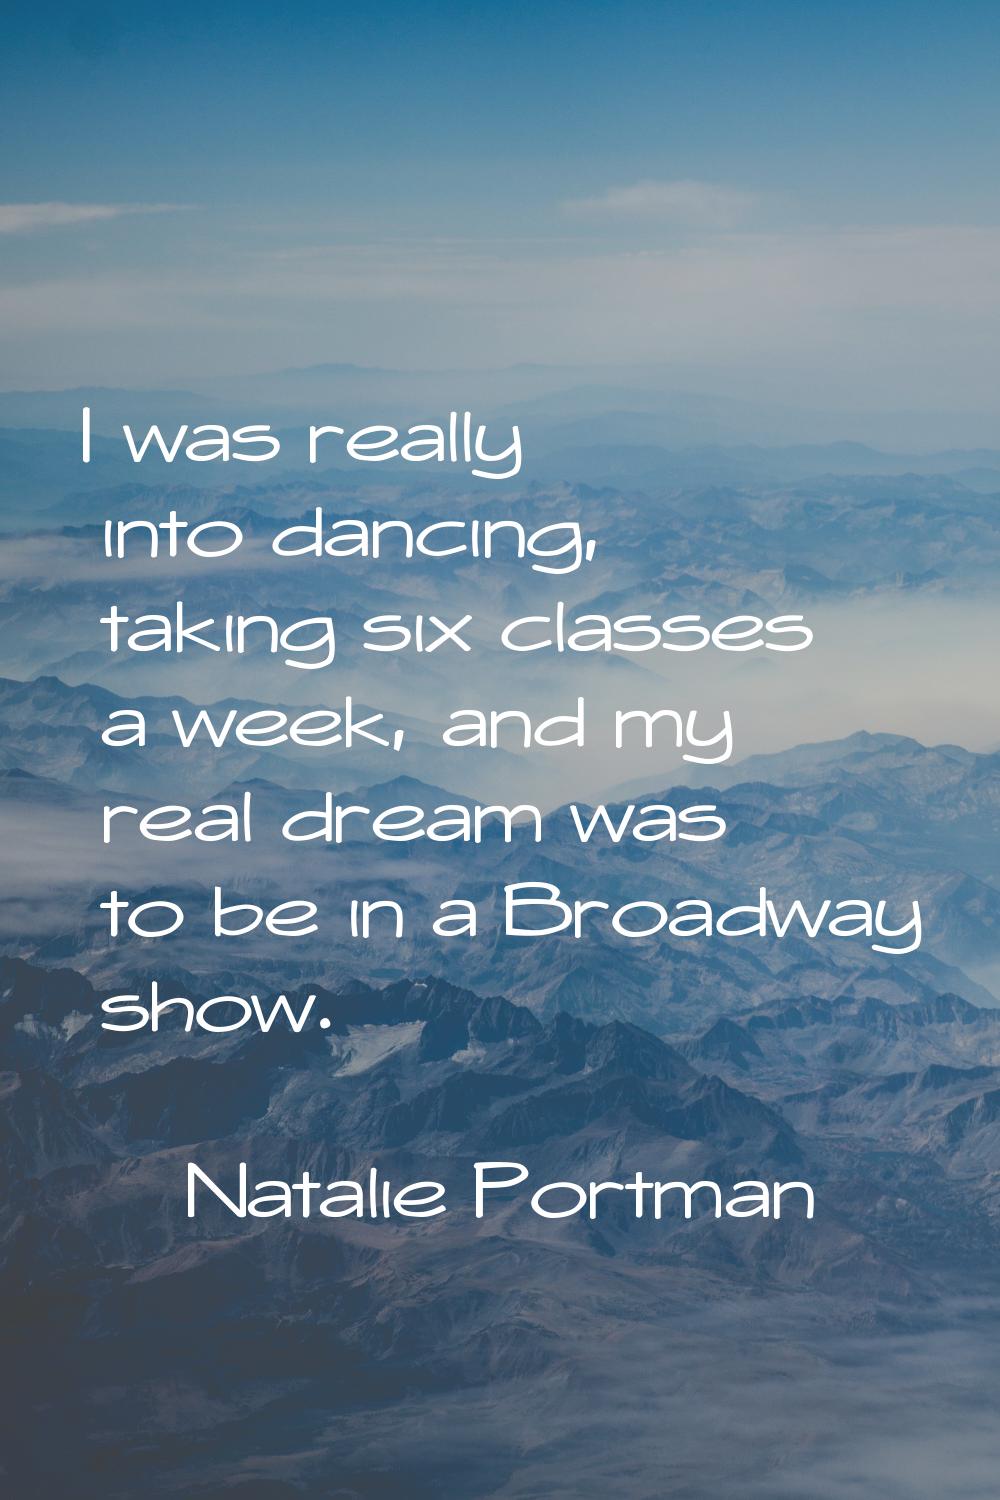 I was really into dancing, taking six classes a week, and my real dream was to be in a Broadway sho